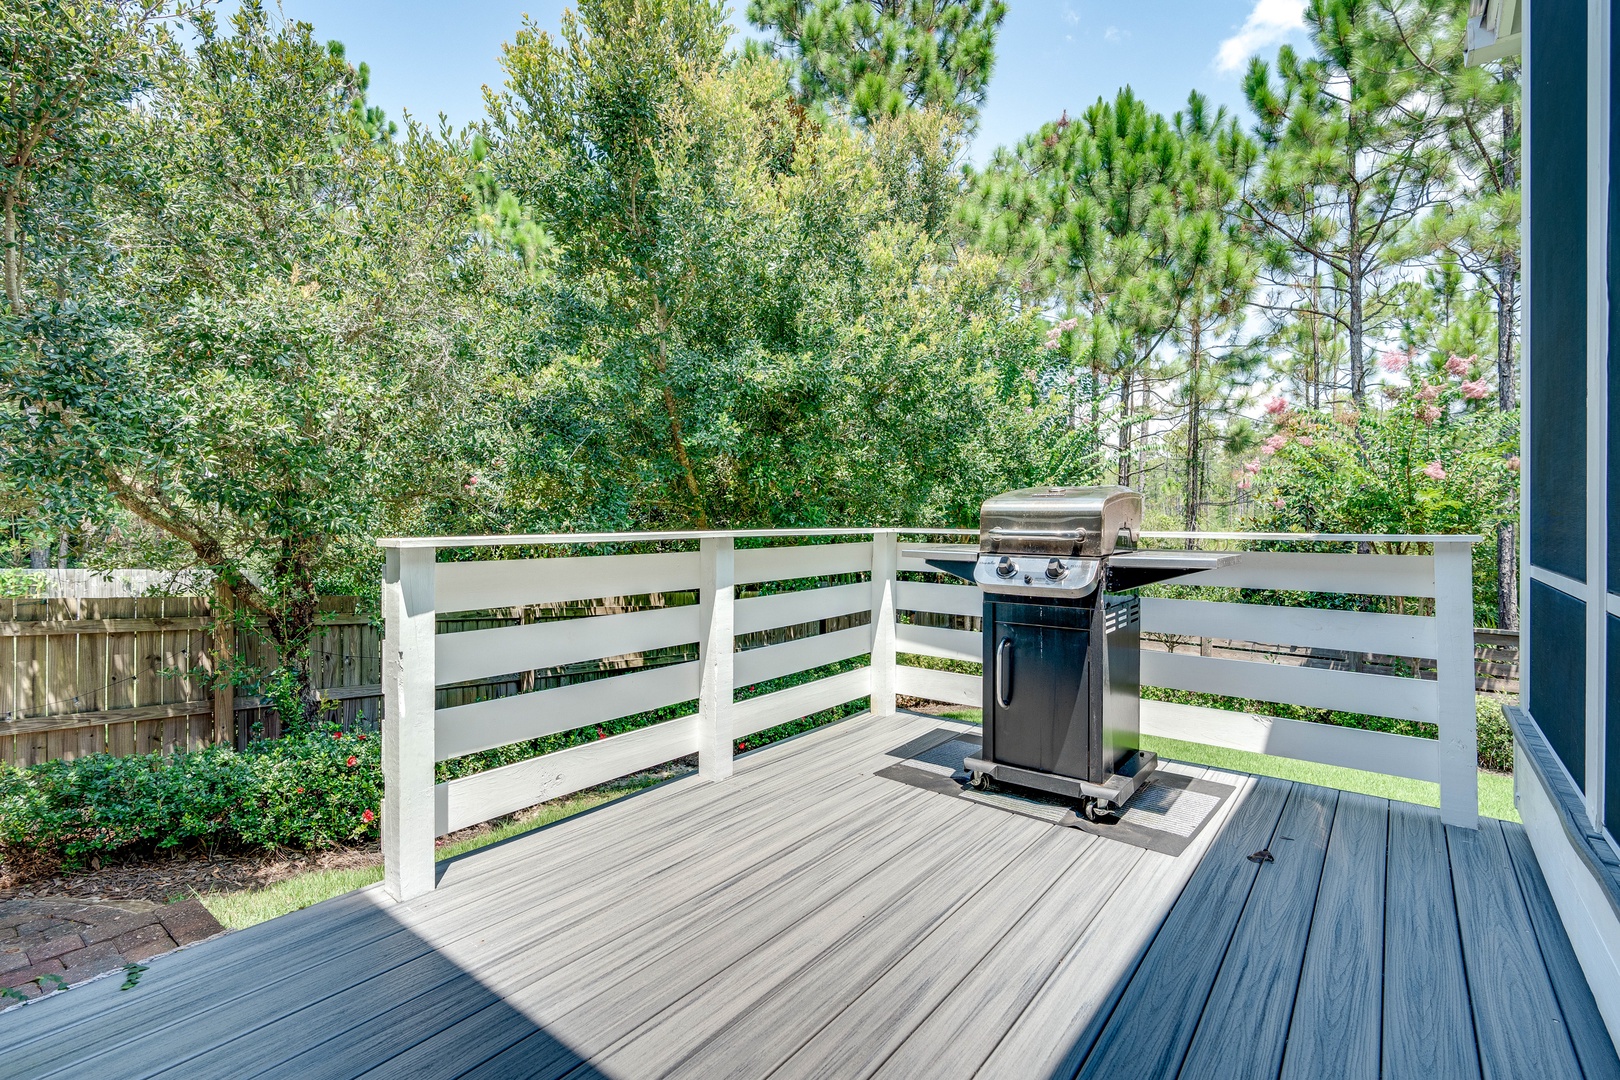 Sweet Breeze also features a grilling deck adjoining the lanai and back yard!